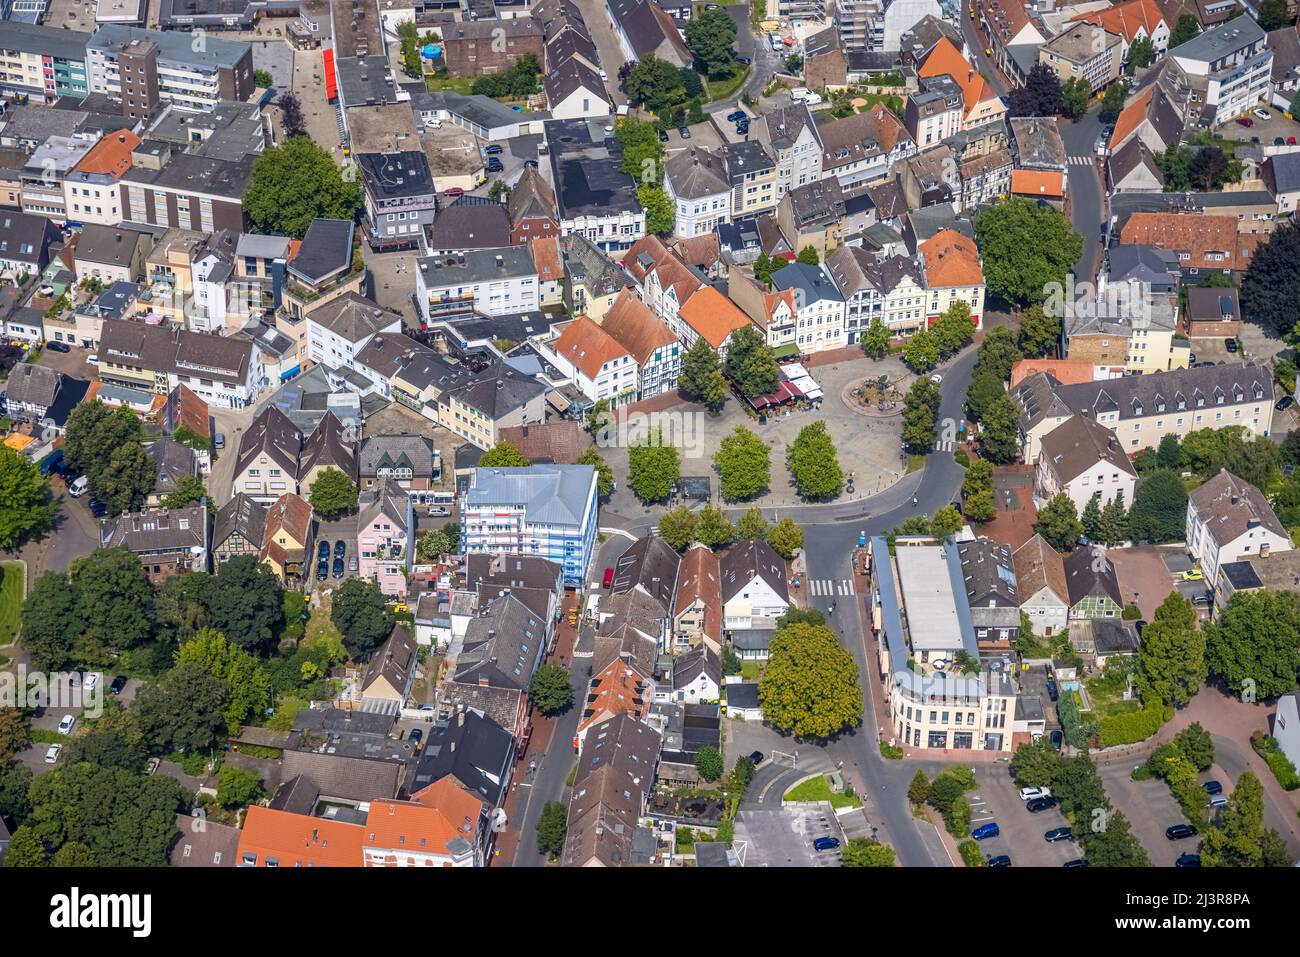 Aerial view, city centre with Old Market and Telgmann Fountain in the district Kolonie Tannenberg, Kamen, Ruhr Area, North Rhine-Westphalia, Germany, Stock Photo